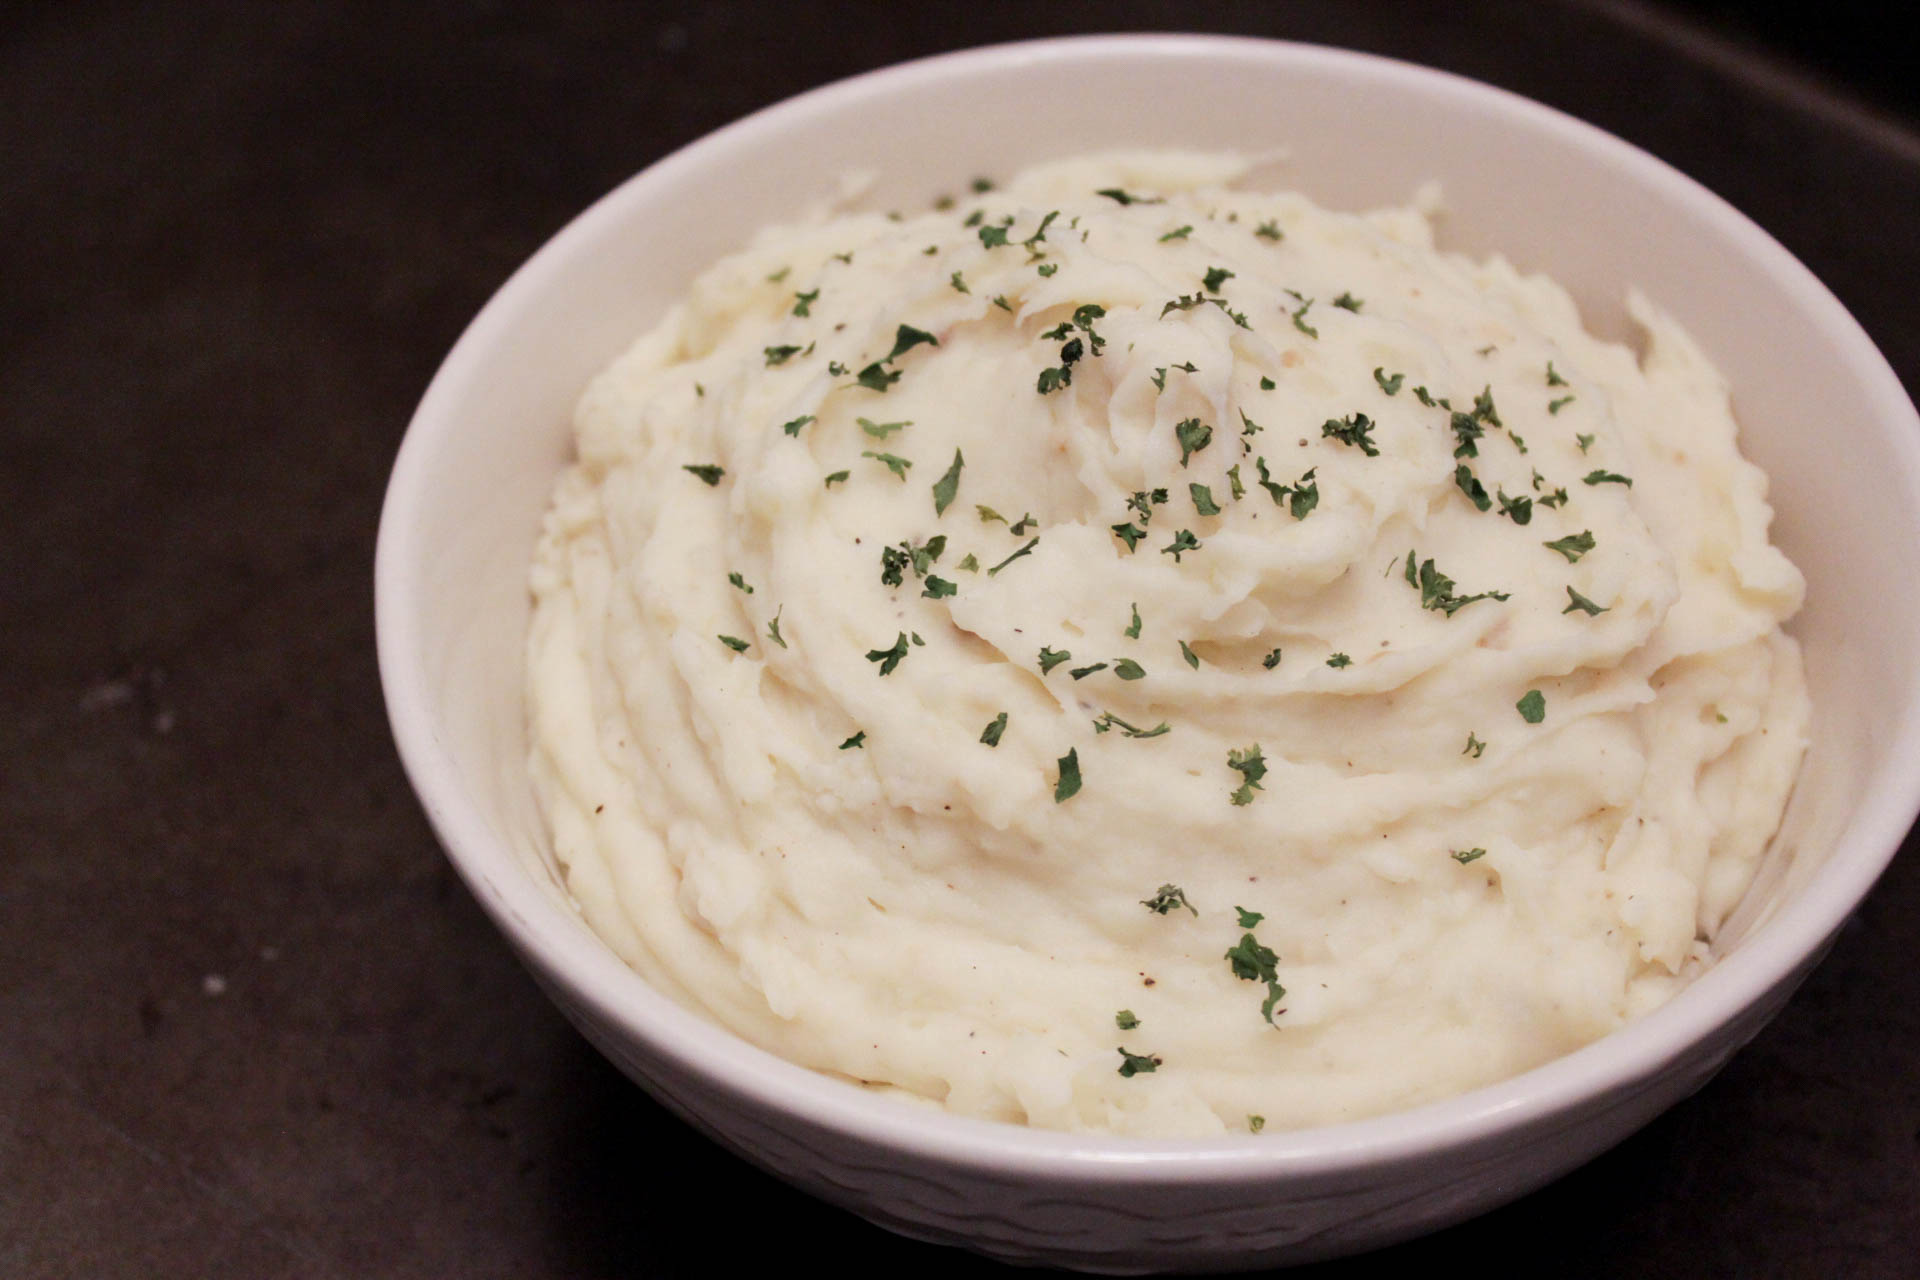 bowl of mashed potatoes topped with dried parsley